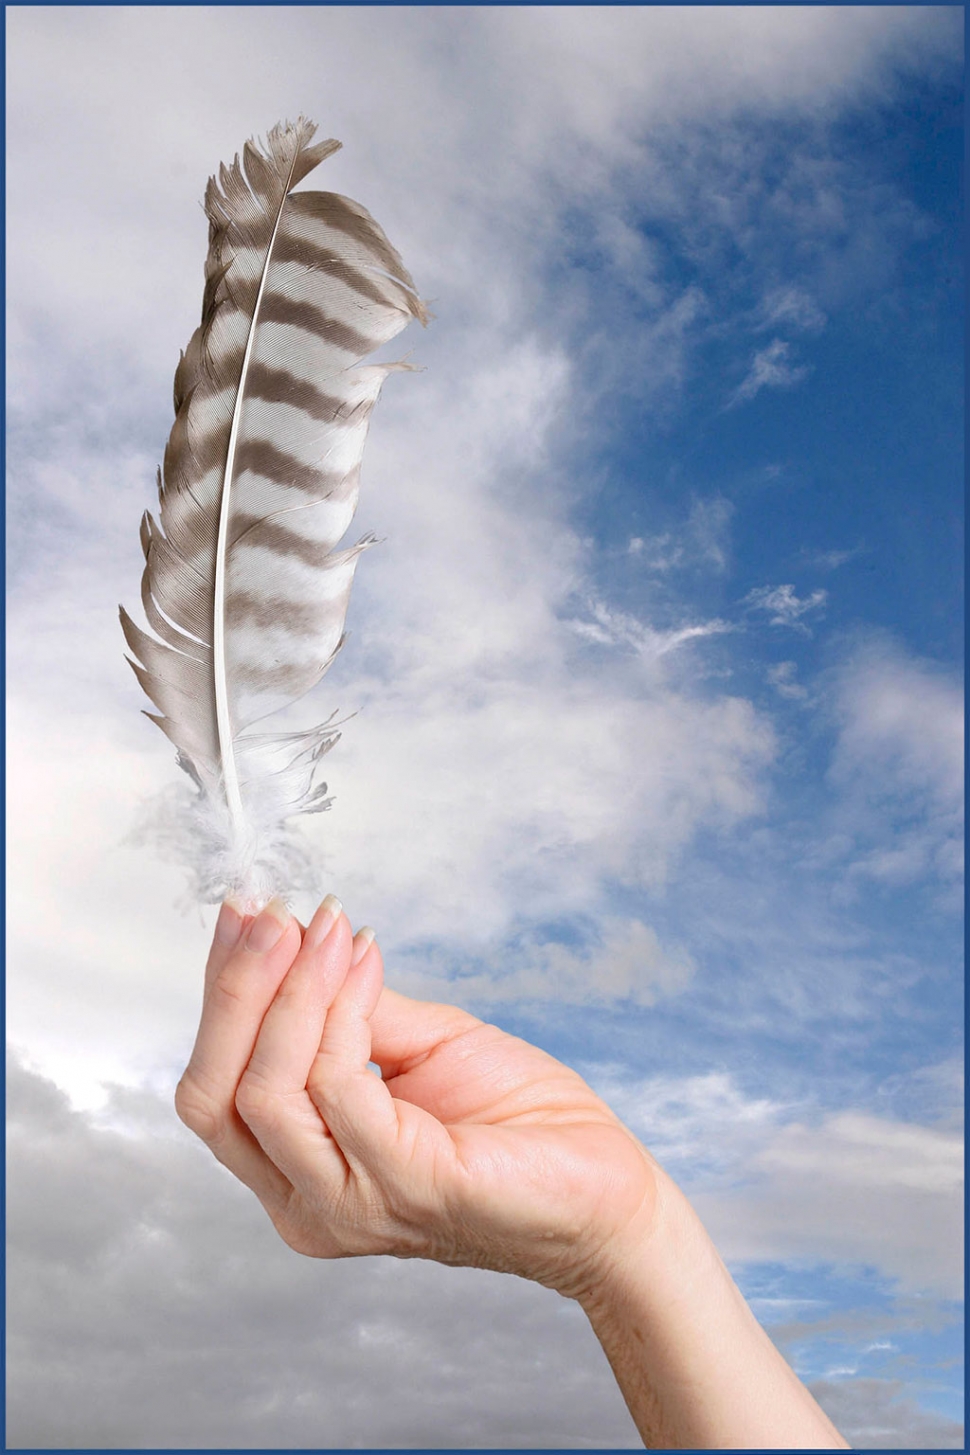 "Hawk Feather" by Photographer Roger Conrad